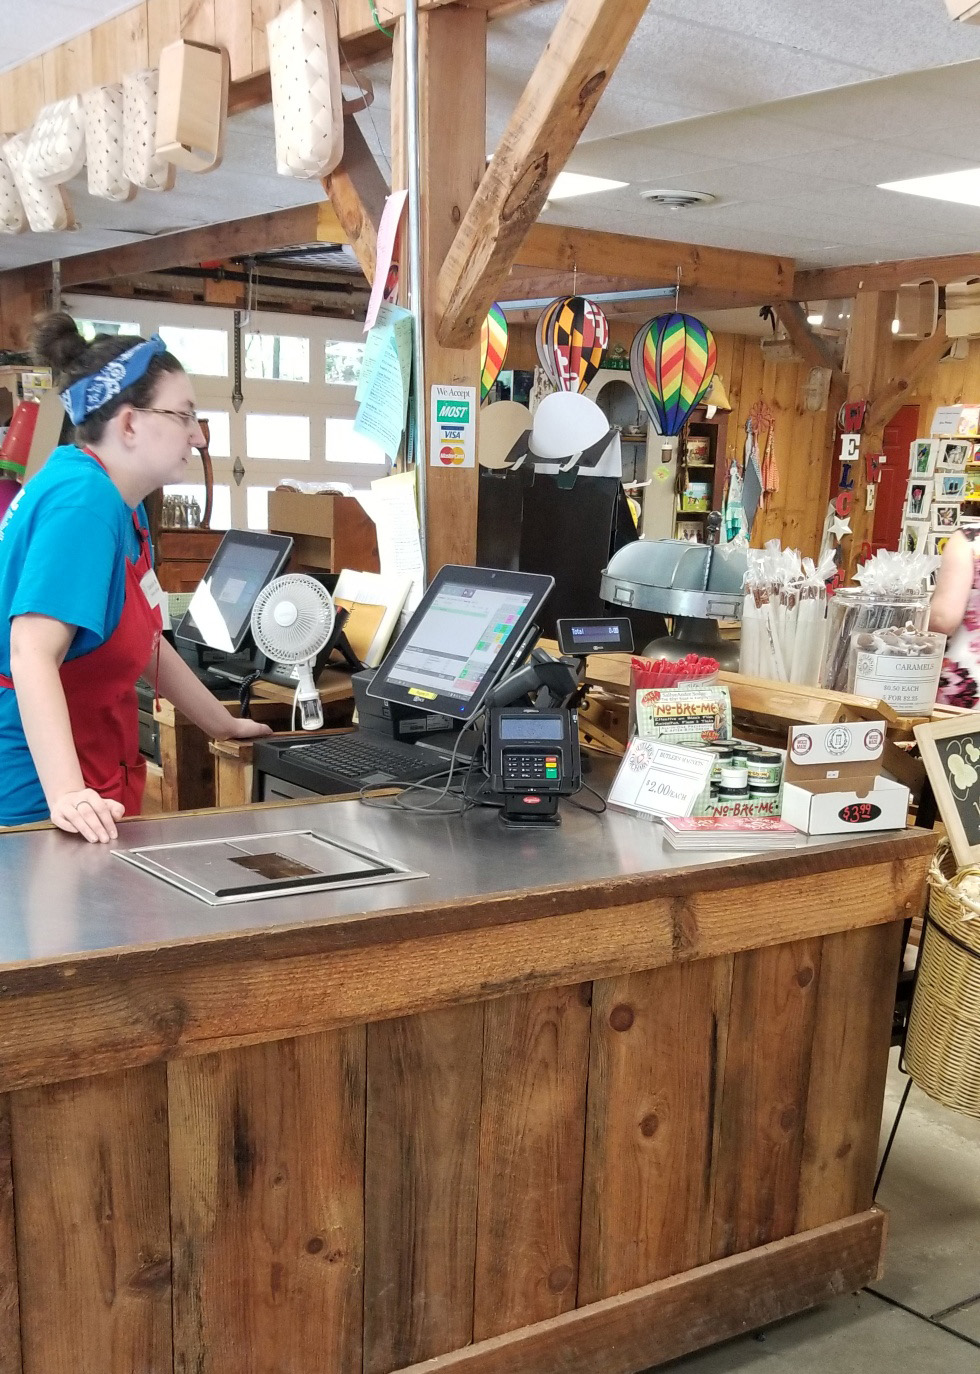 Point of Sale at Destination Farmer's Markets with a employee turned facing it